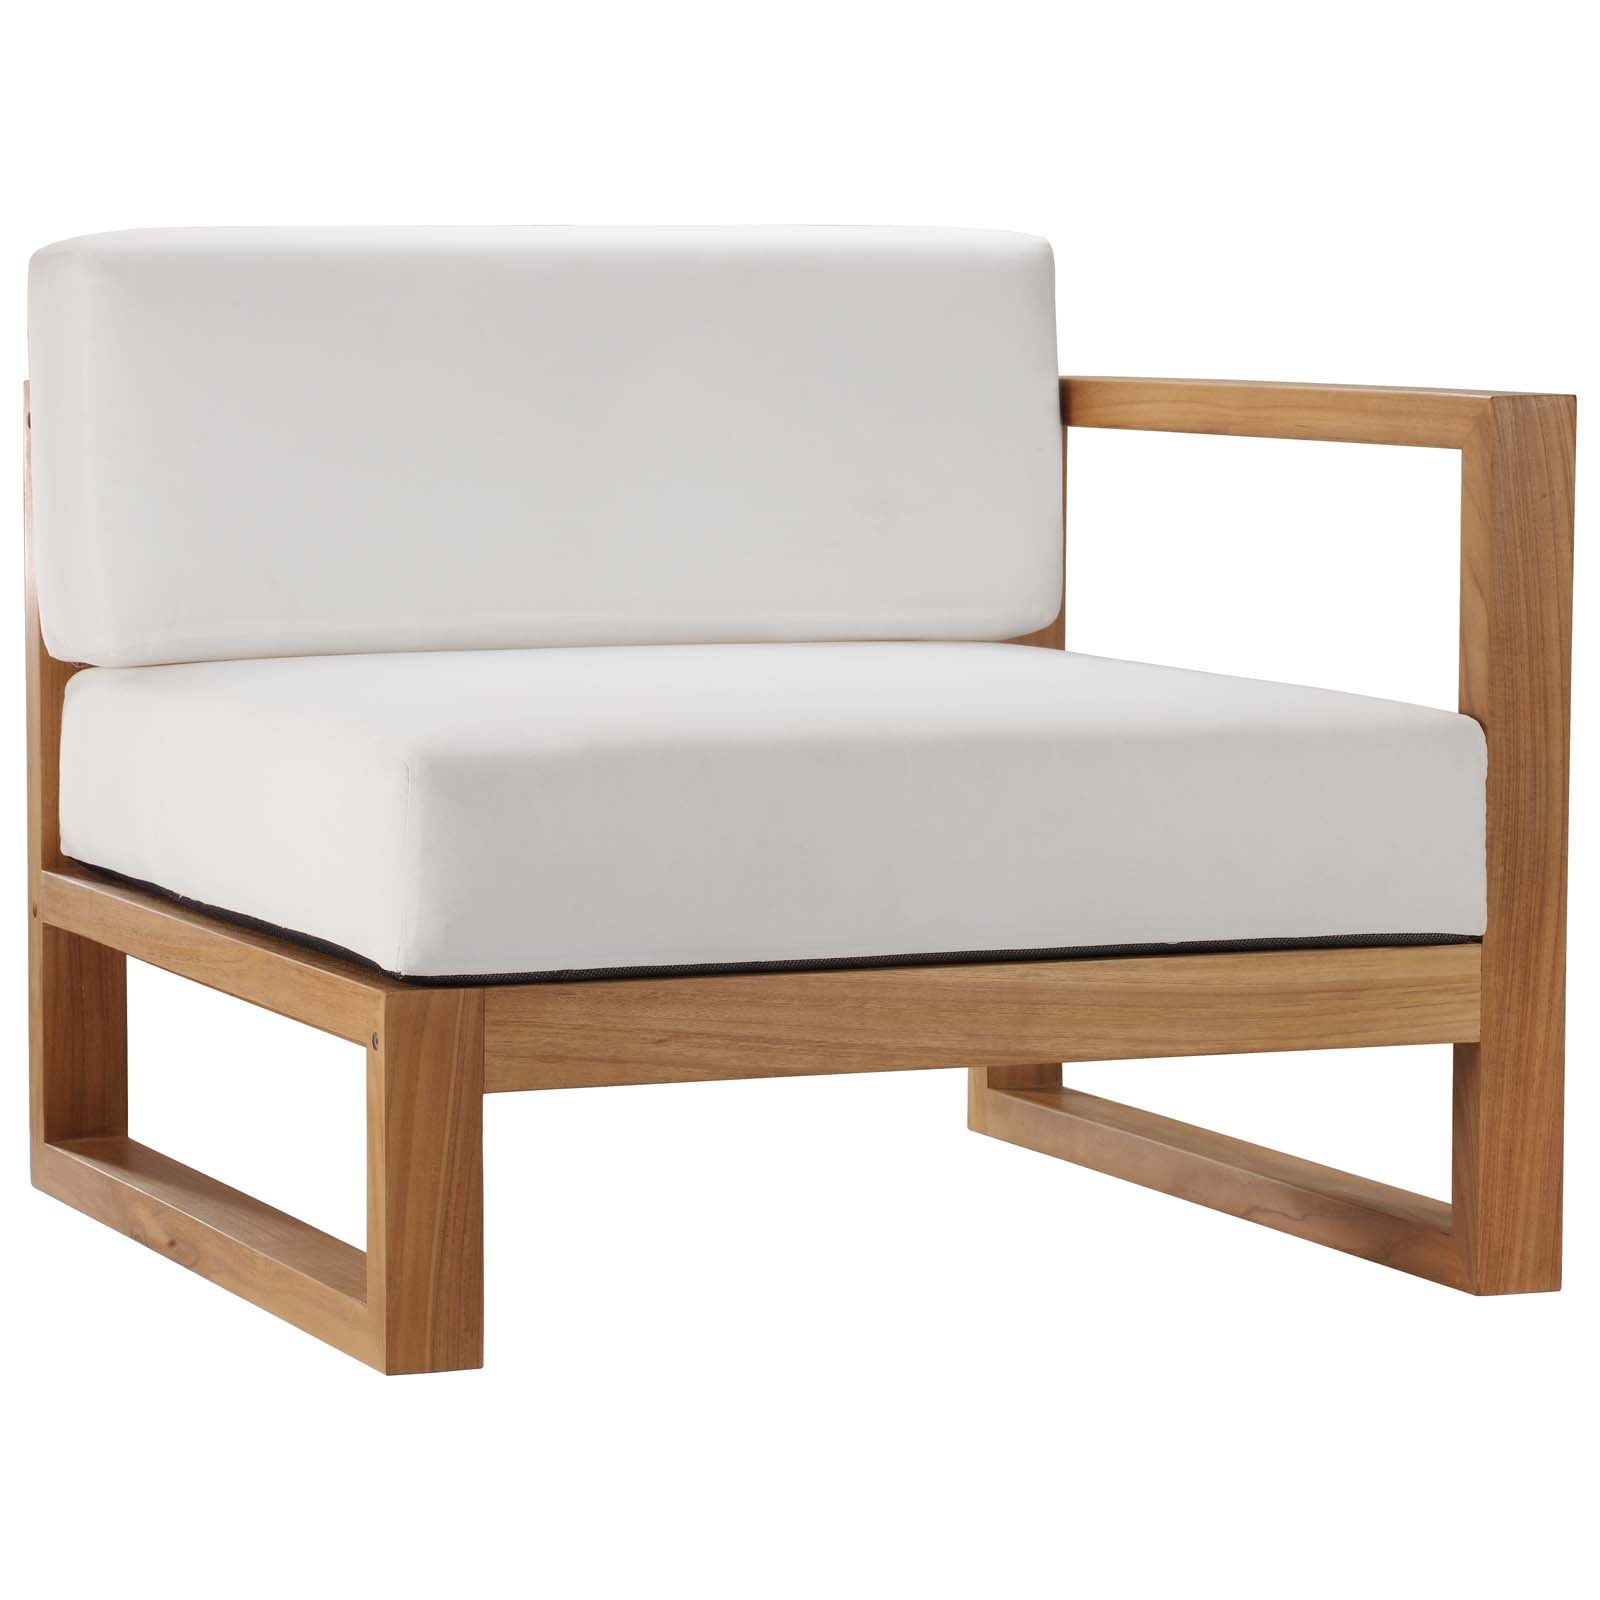 Modway Outdoor Conversation Sets - Upland Outdoor Patio Teak Wood 5-Piece Sectional Sofa Set Natural White